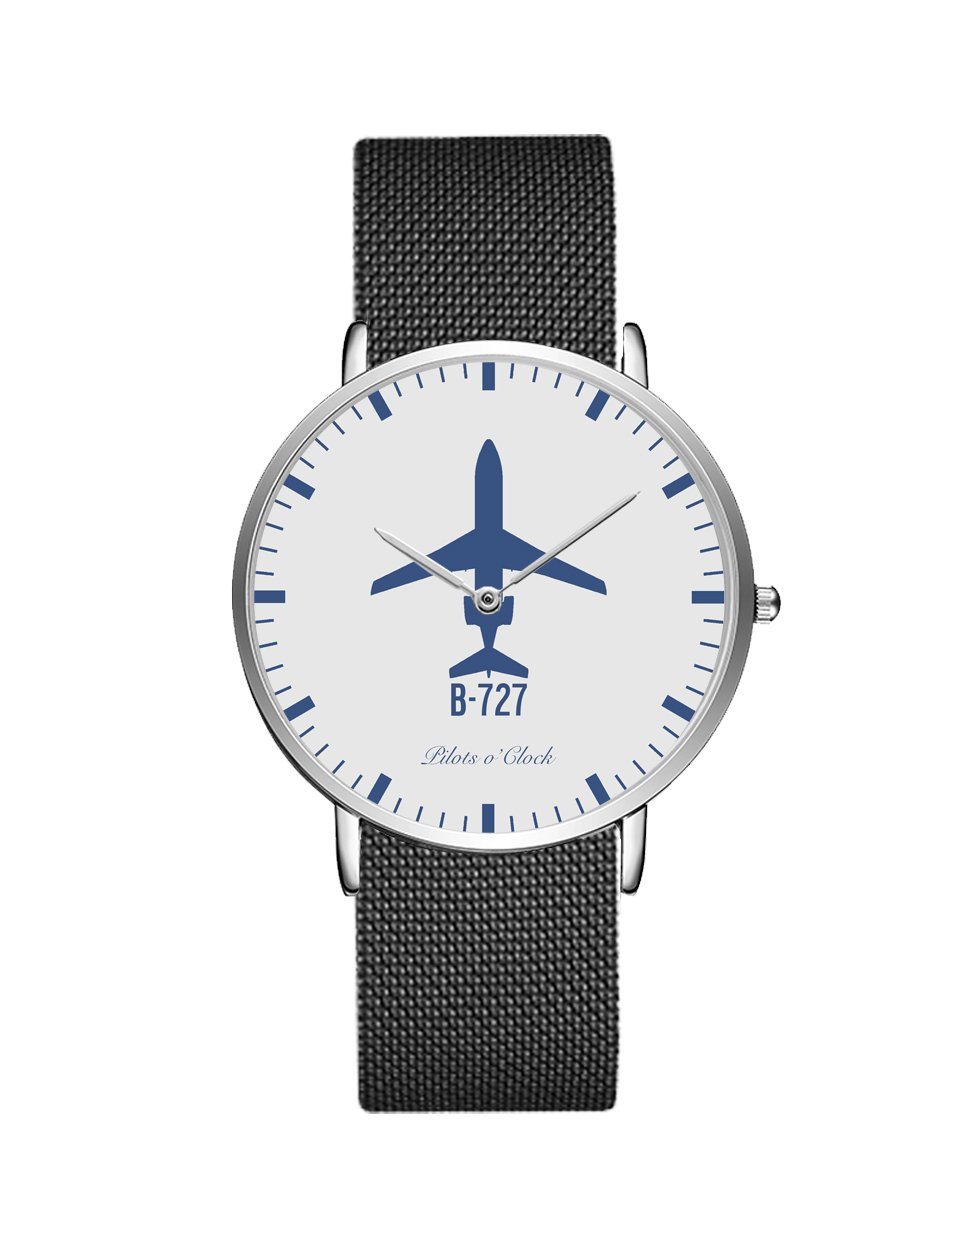 Boeing 727 Stainless Steel Strap Watches Pilot Eyes Store Silver & Black Stainless Steel Strap 